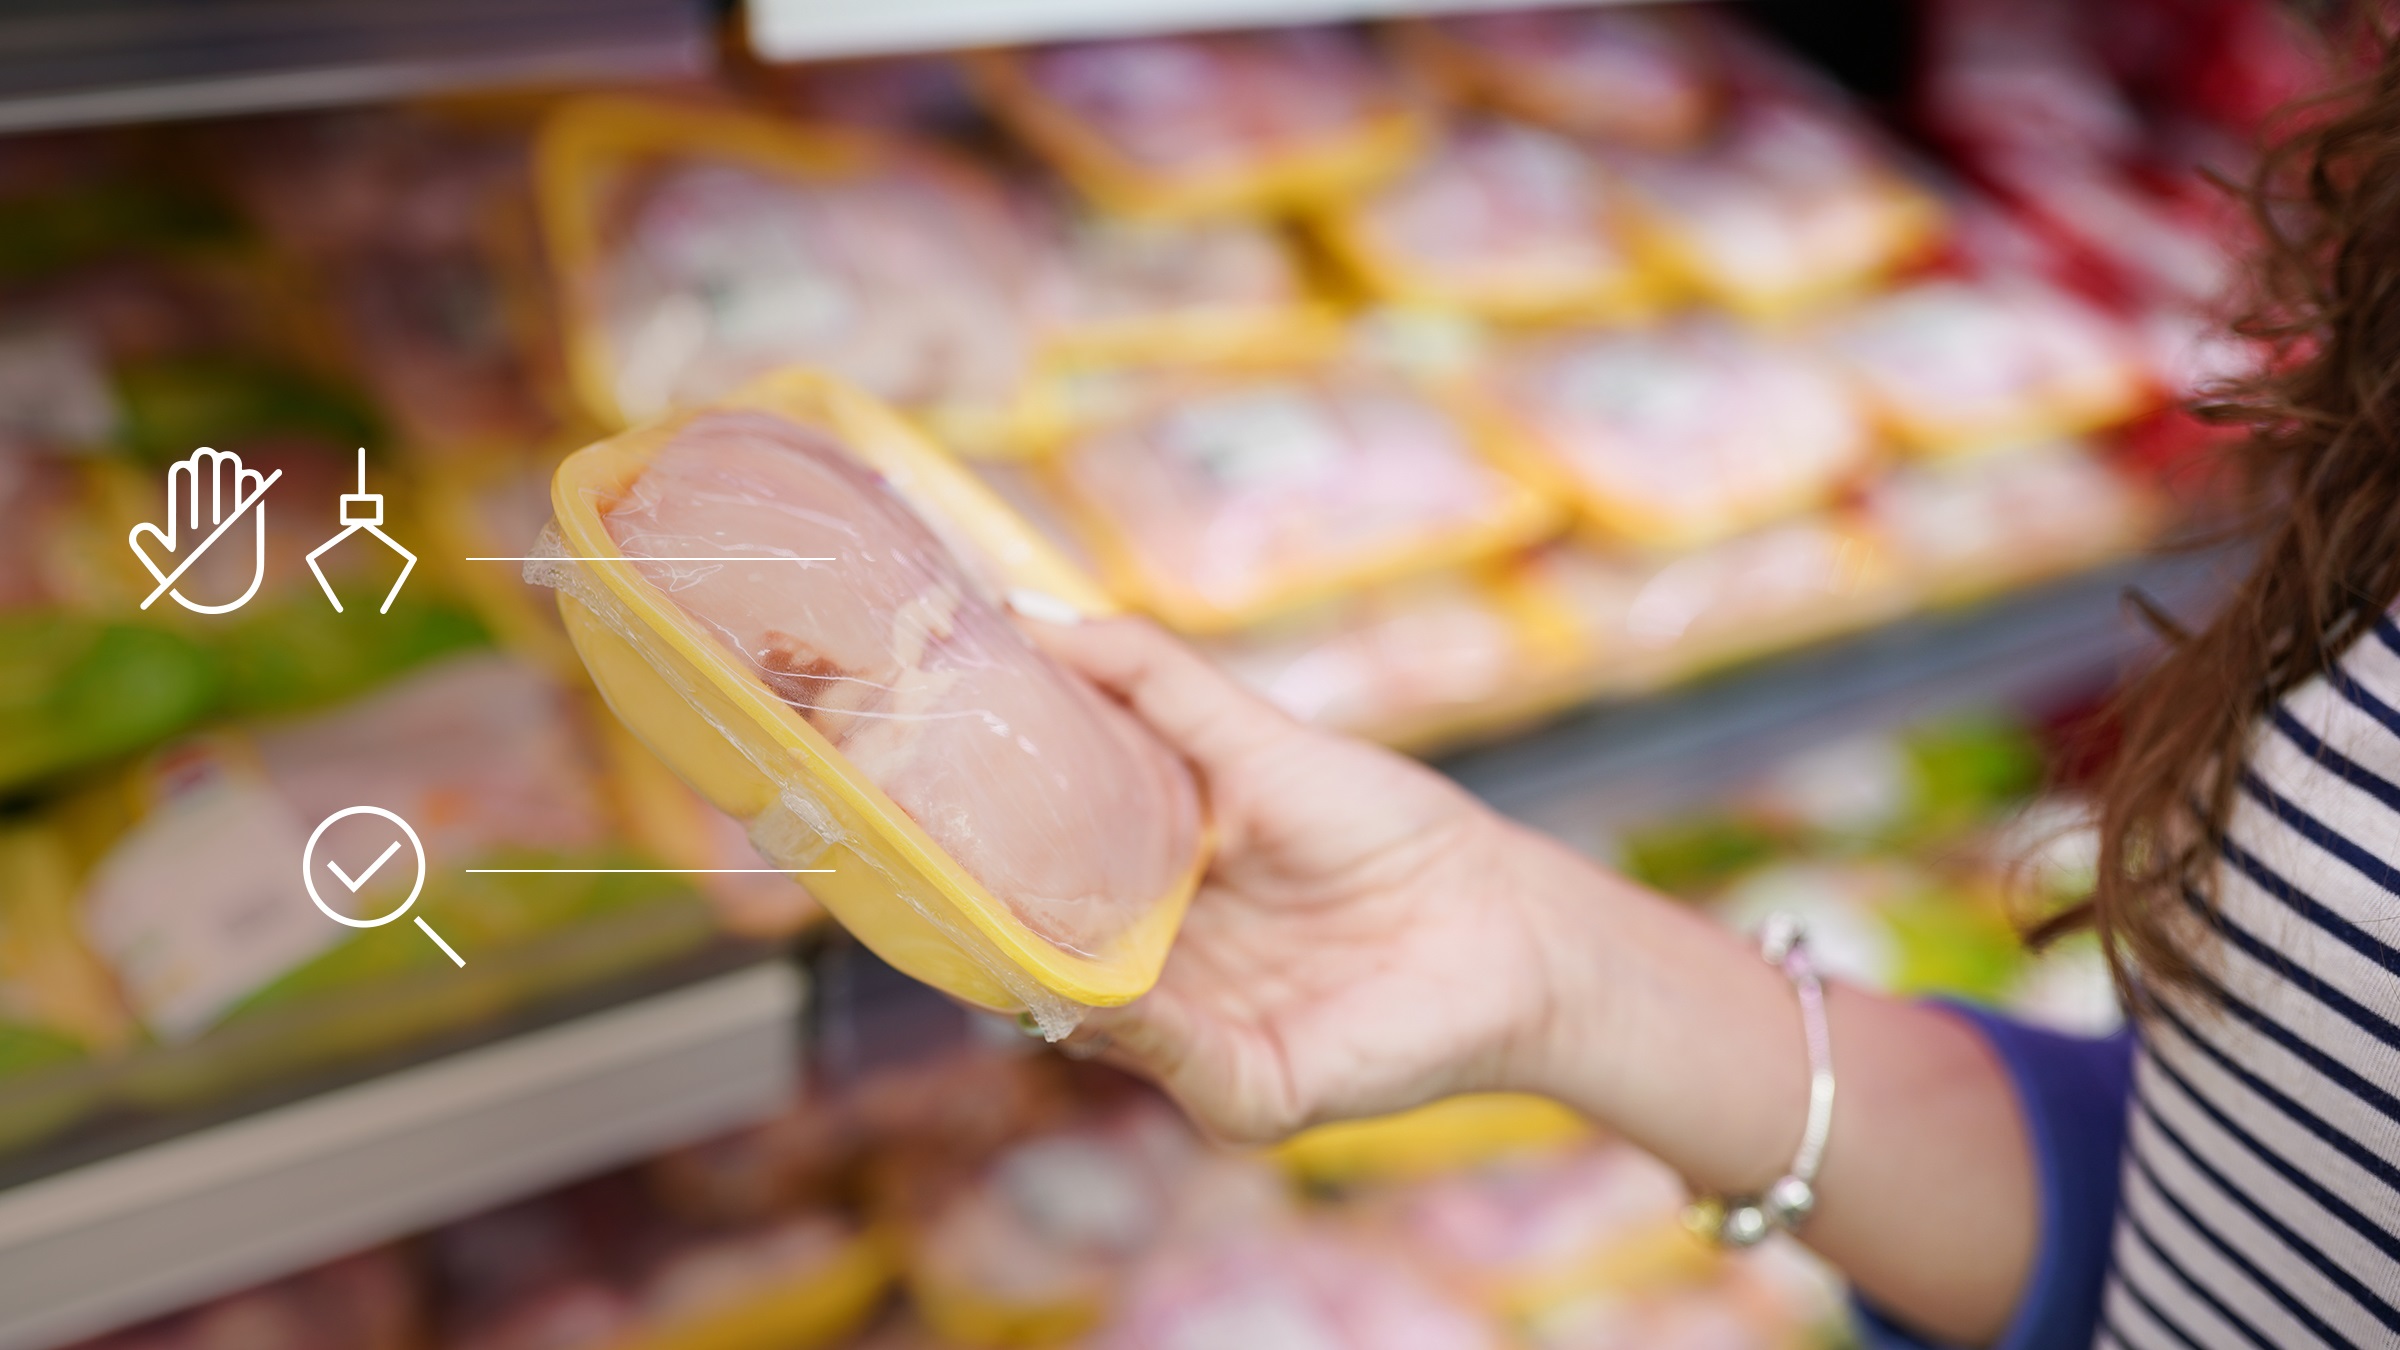 How to automate food safety in the poultry industry?